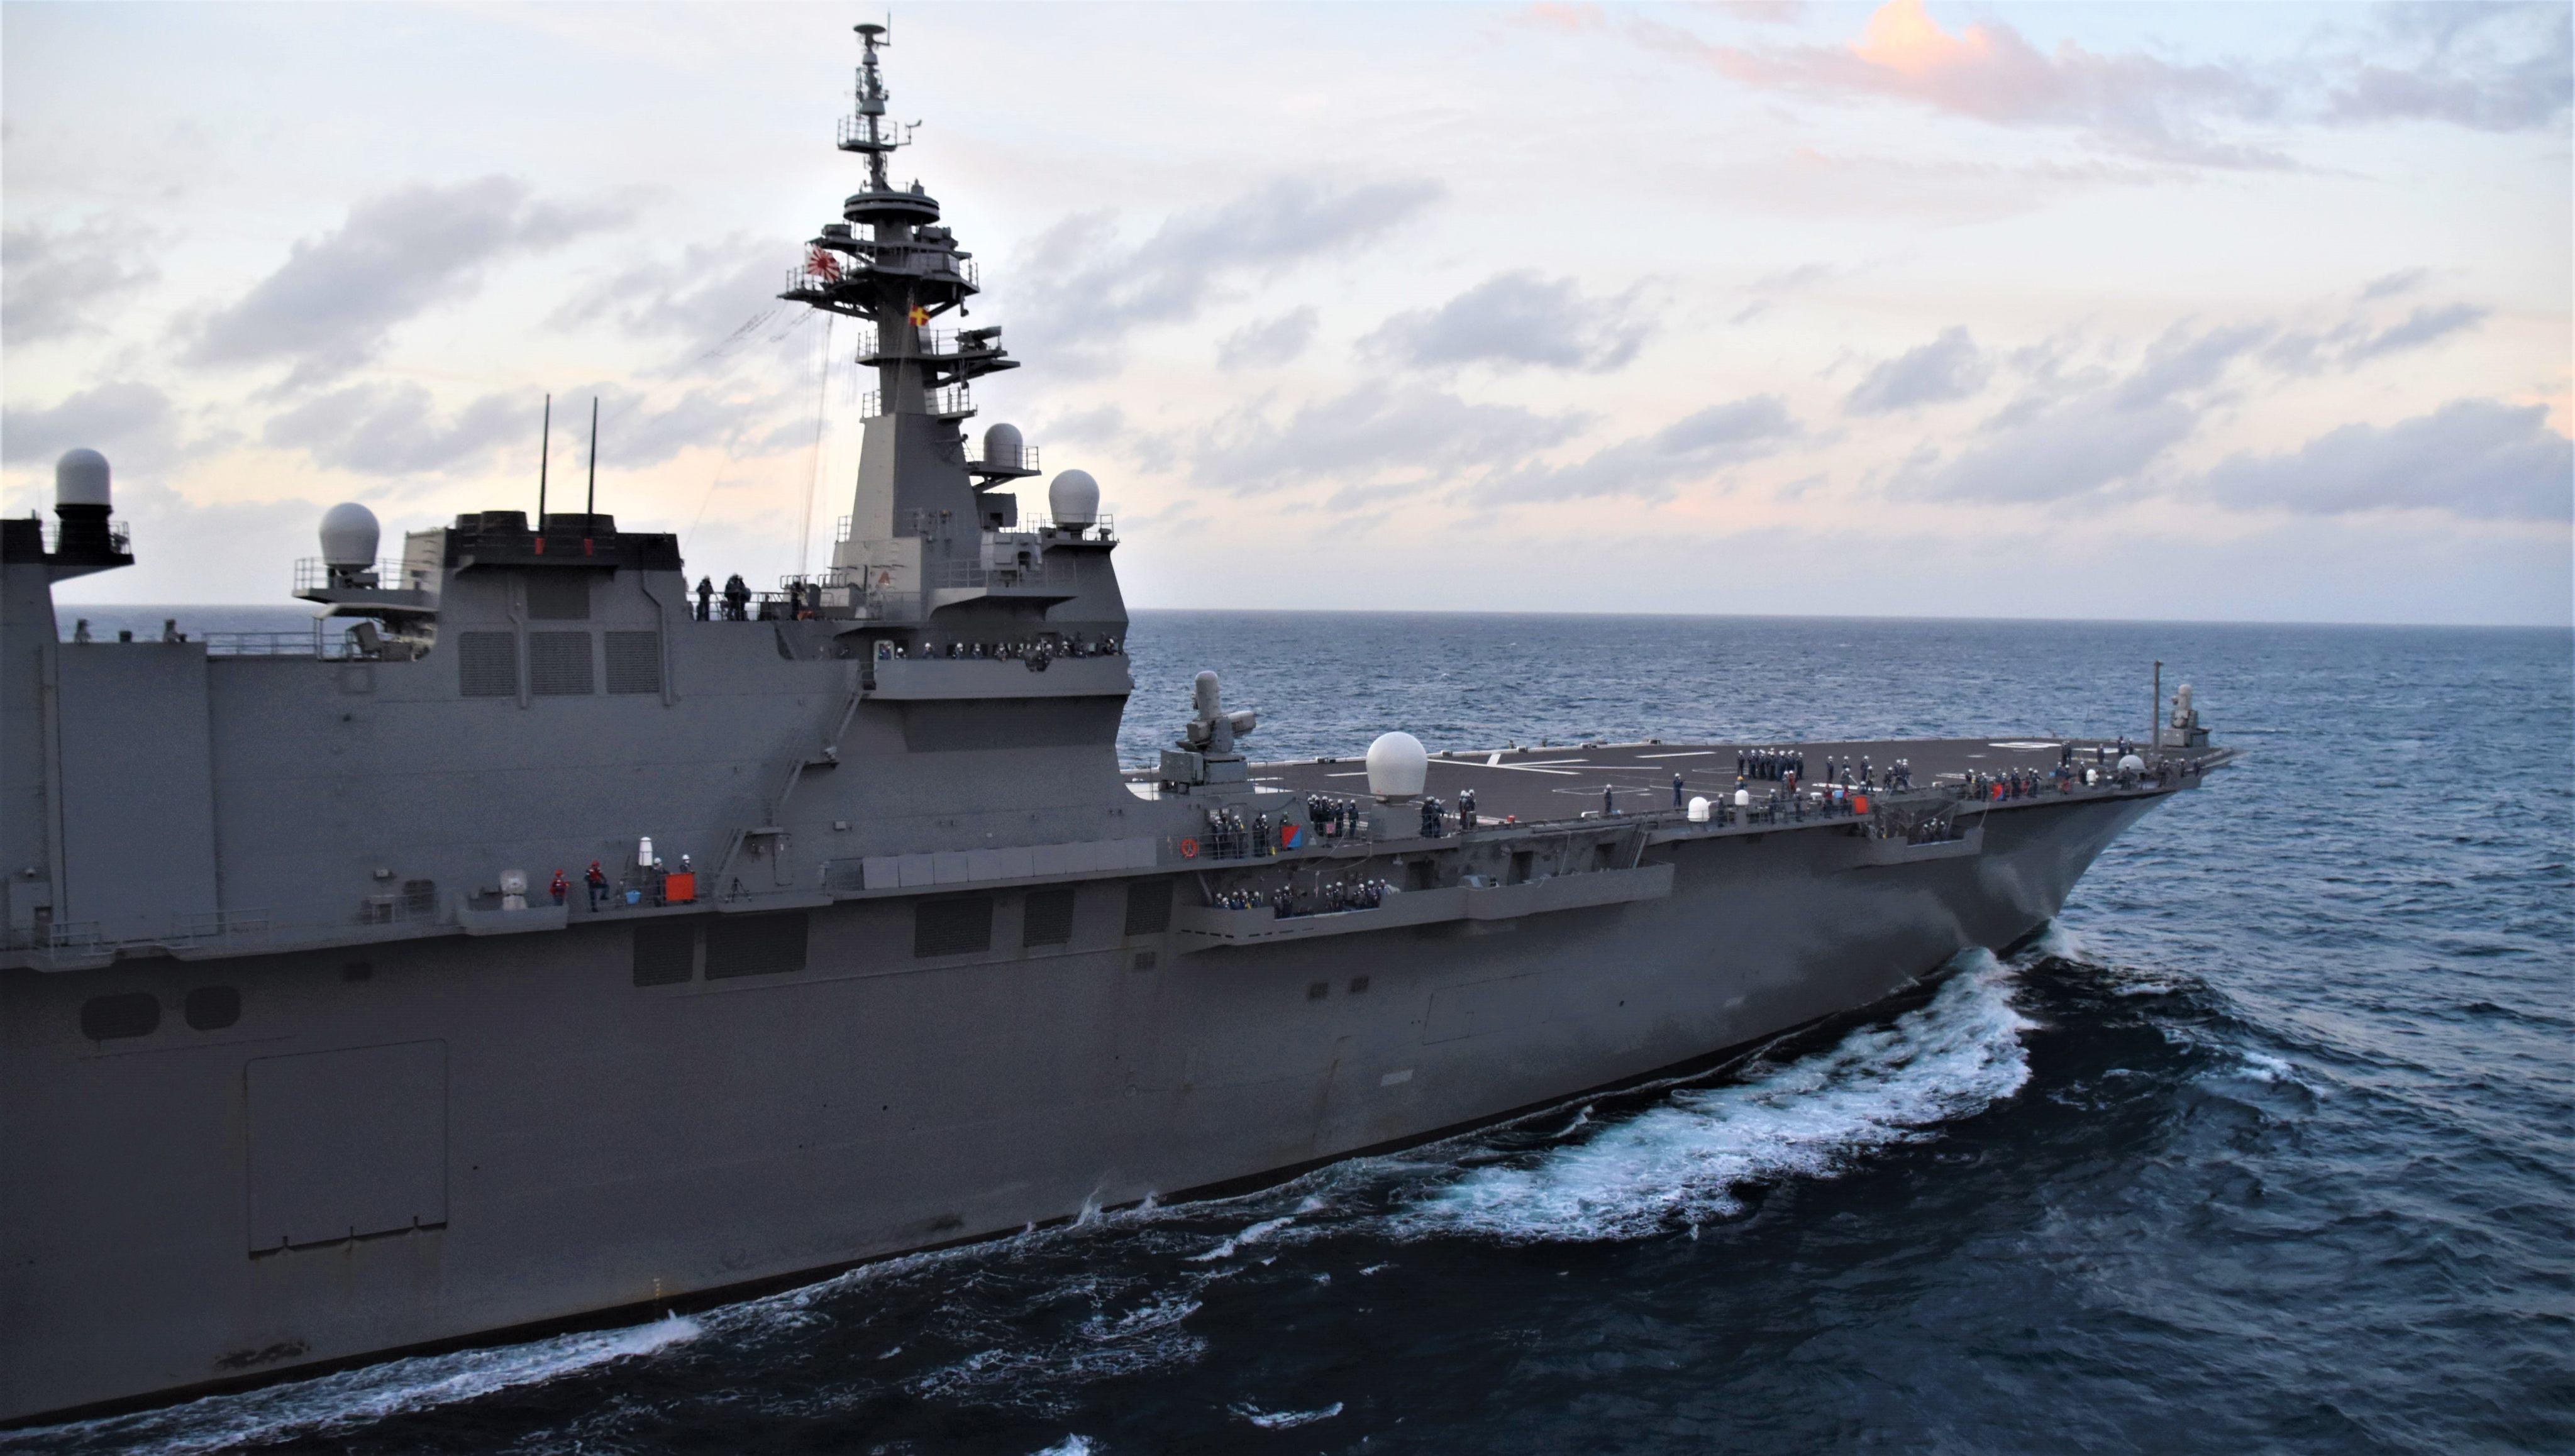 Japan’s Izumo-class aircraft carrier seen in the Indian Ocean on October 18, 2021. The multipurpose destroyer was developed as part of Japan’s ongoing military expansion. Photo: Capt. Daniel Glazier